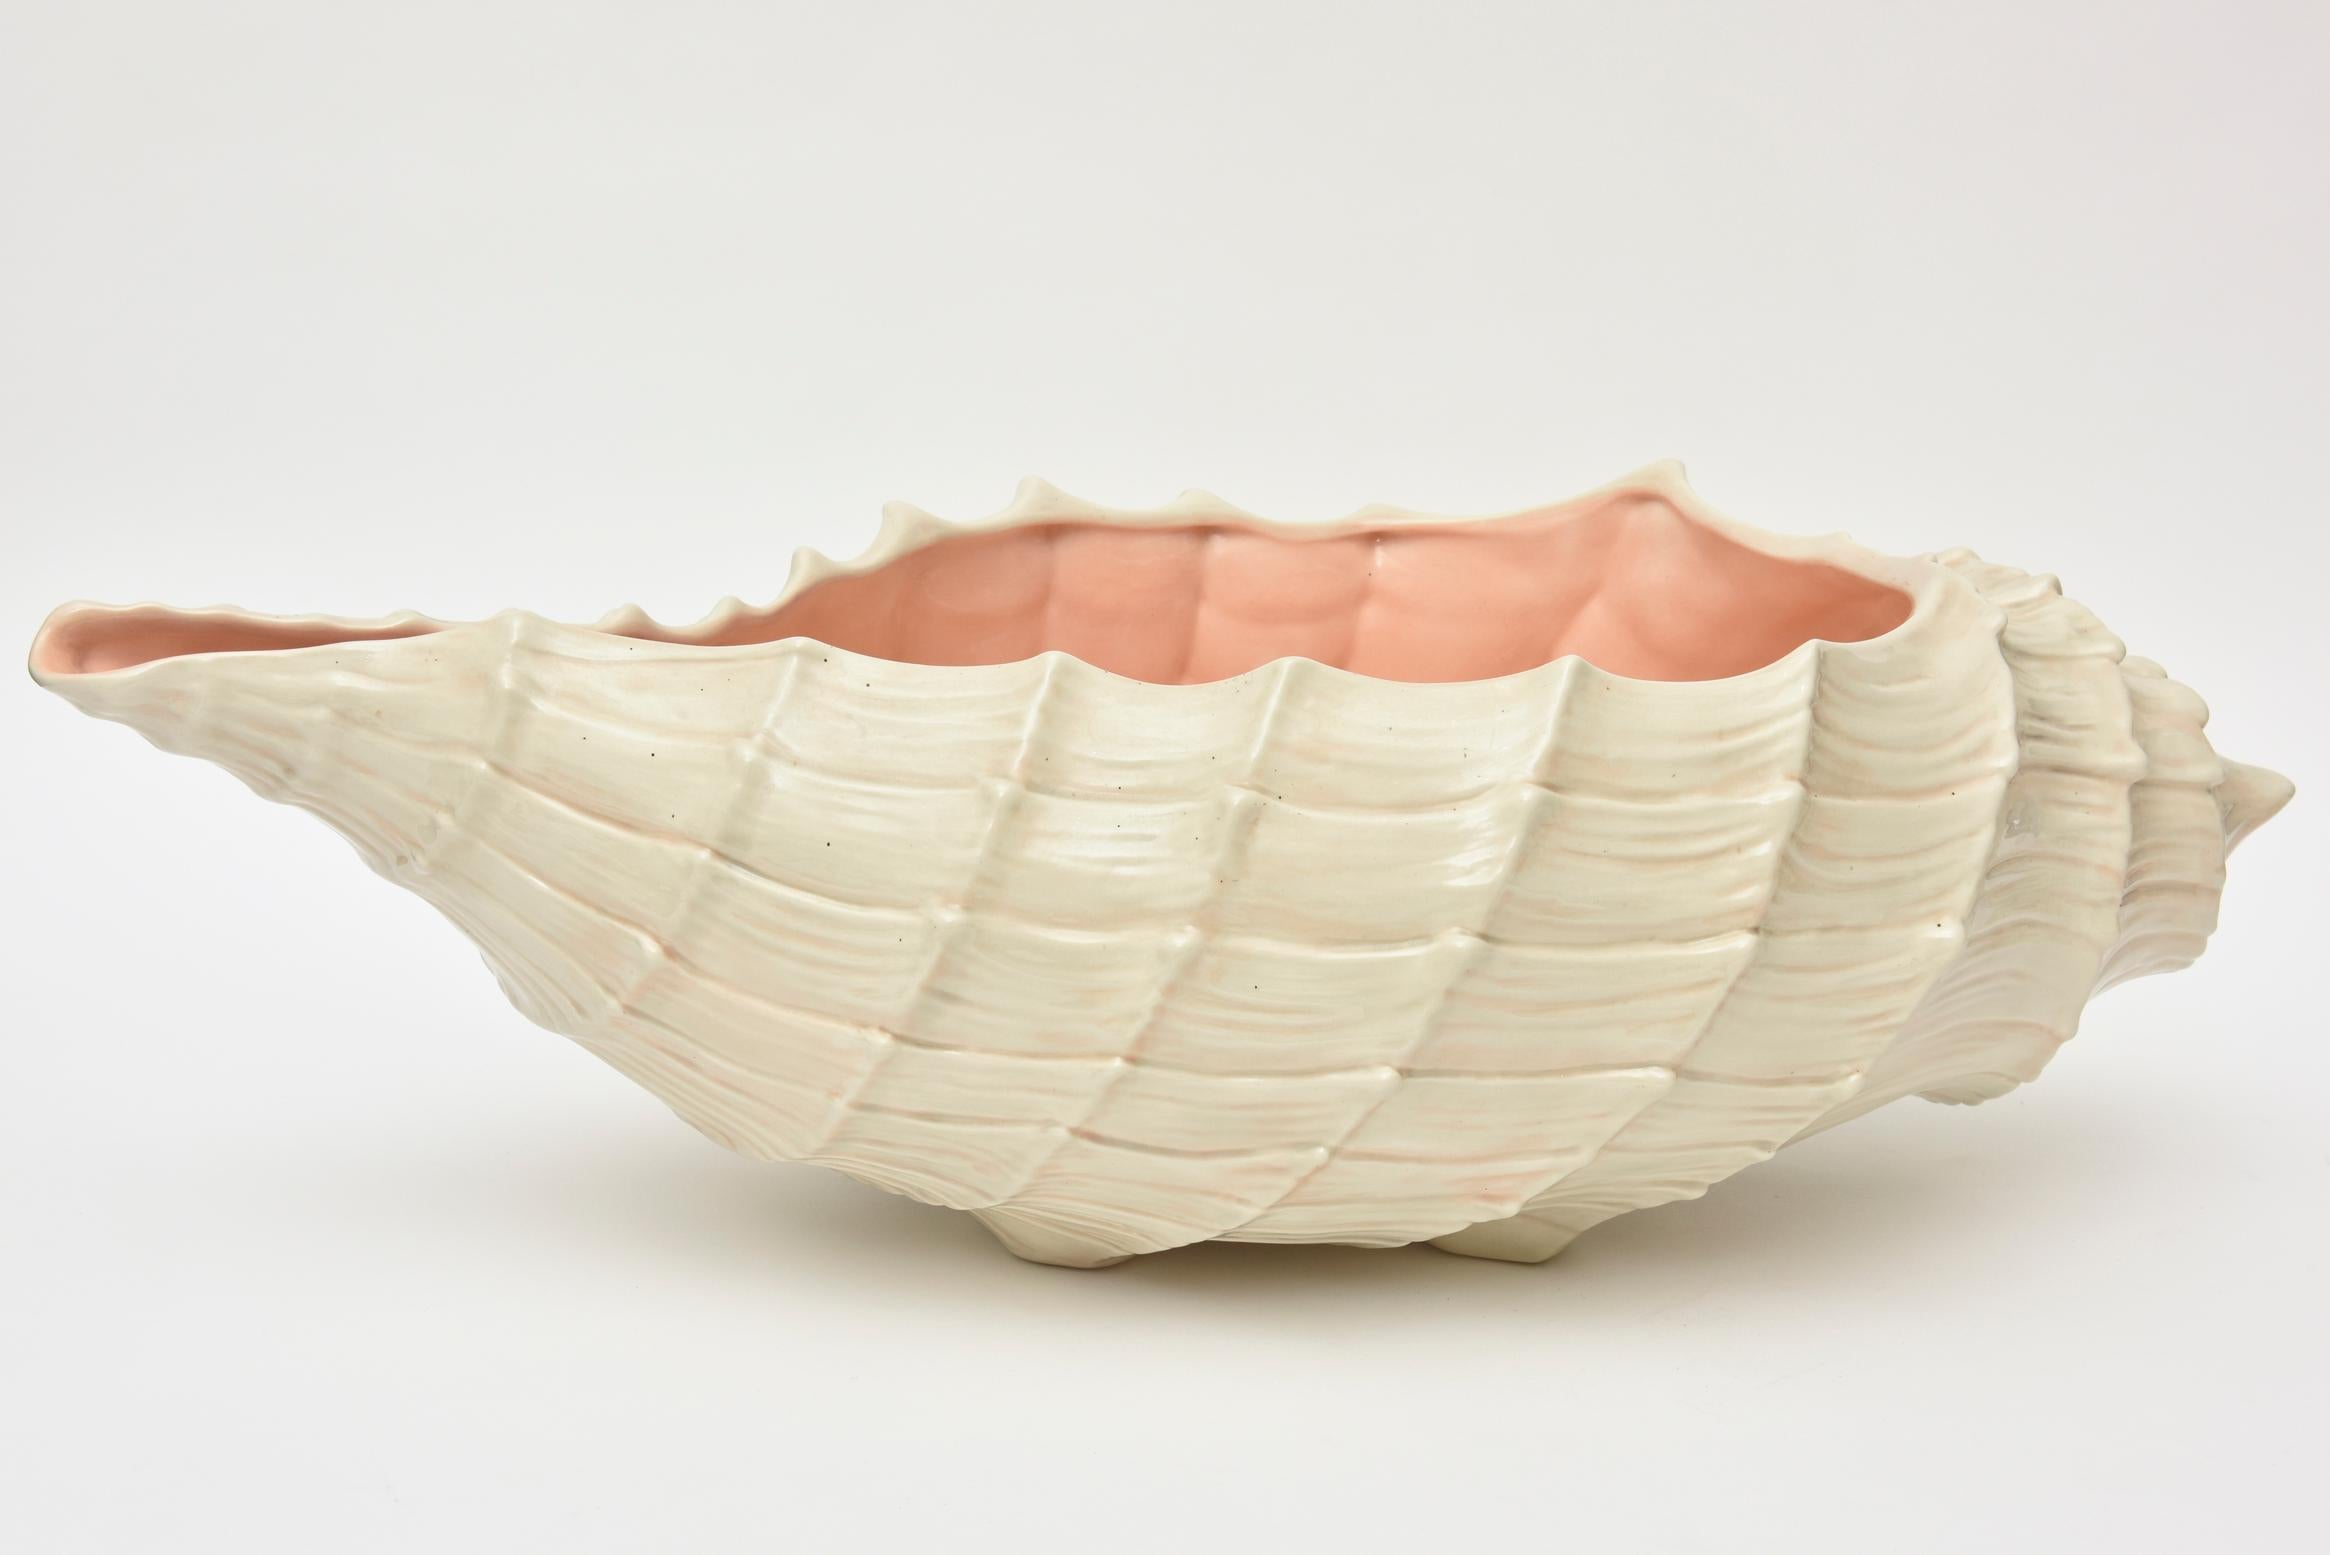 This lovely and monumental oversized vintage glazed organic modern ceramic shell and textural bowl makes a statement. It could be used as a gorgeous centerpiece or for serving. This has a multitude of purposes and uses. The raised detail and texture